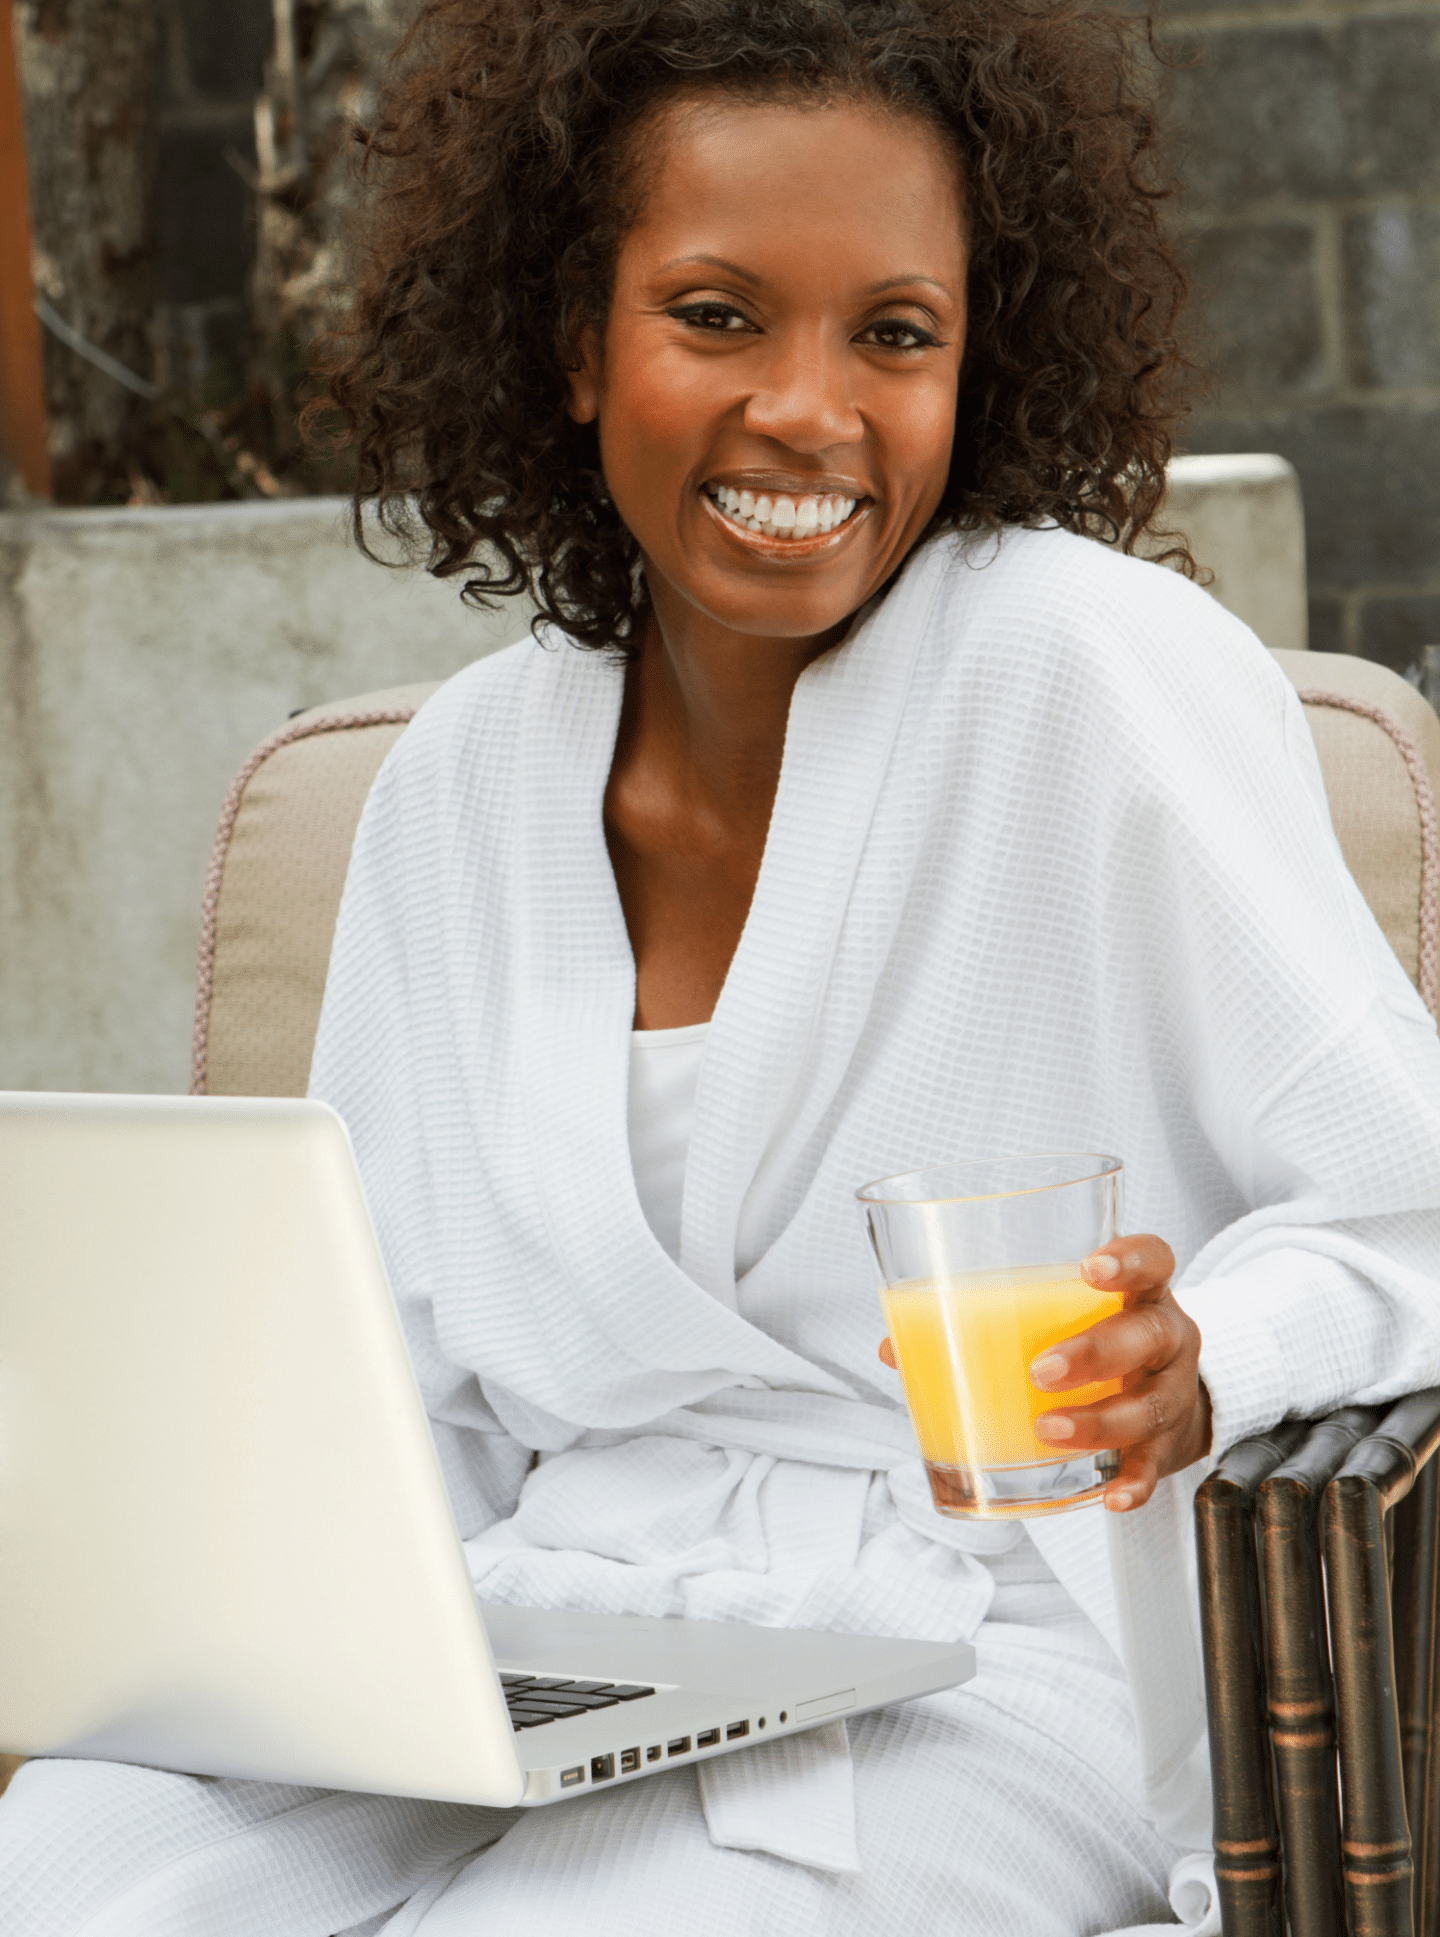 woman smiling with cup in hand and laptop